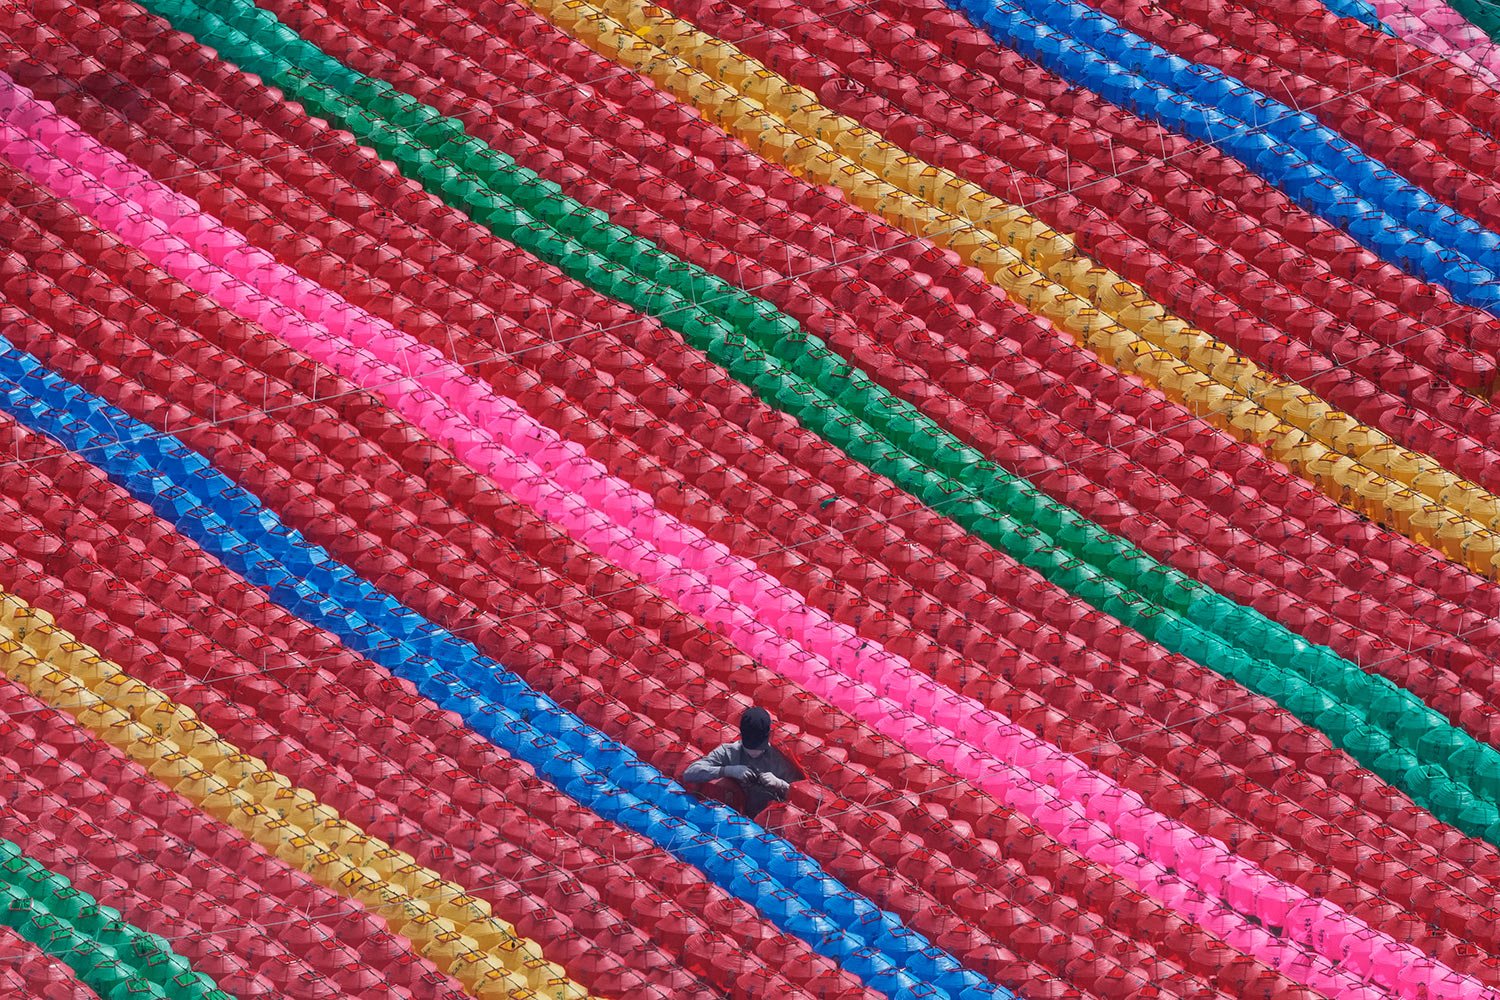  A worker checks the electric wires to hang lanterns for upcoming celebration of Buddha's birthday on May 8 at Jogye temple in Seoul, South Korea, Tuesday, March 22, 2022. (AP Photo/Ahn Young-joon) 